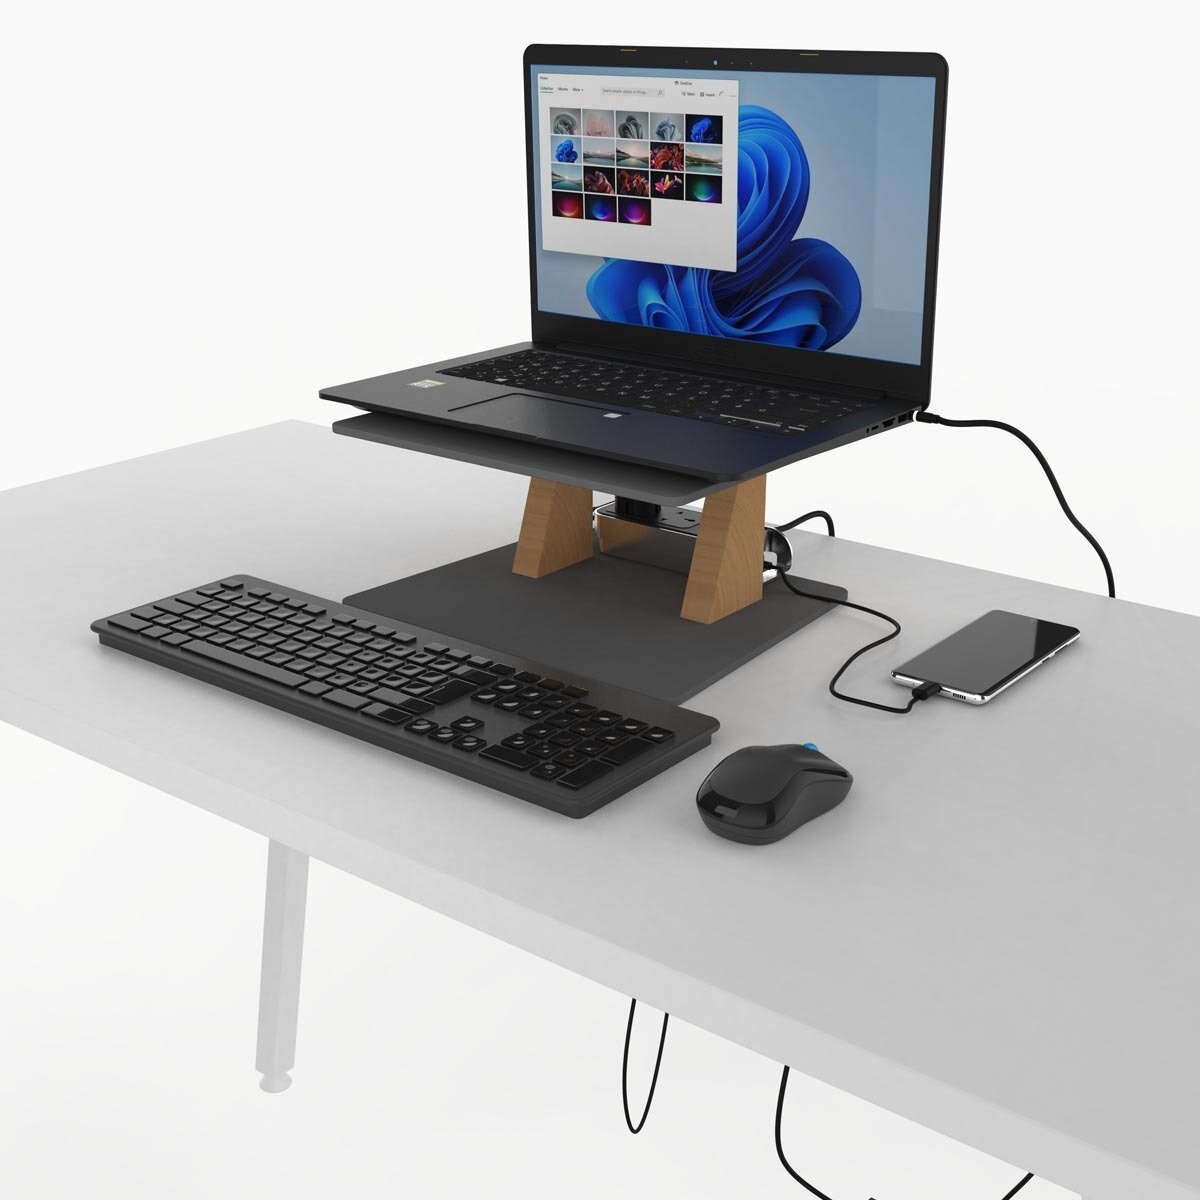 PowErgo: Ergonomic laptop support and power manager